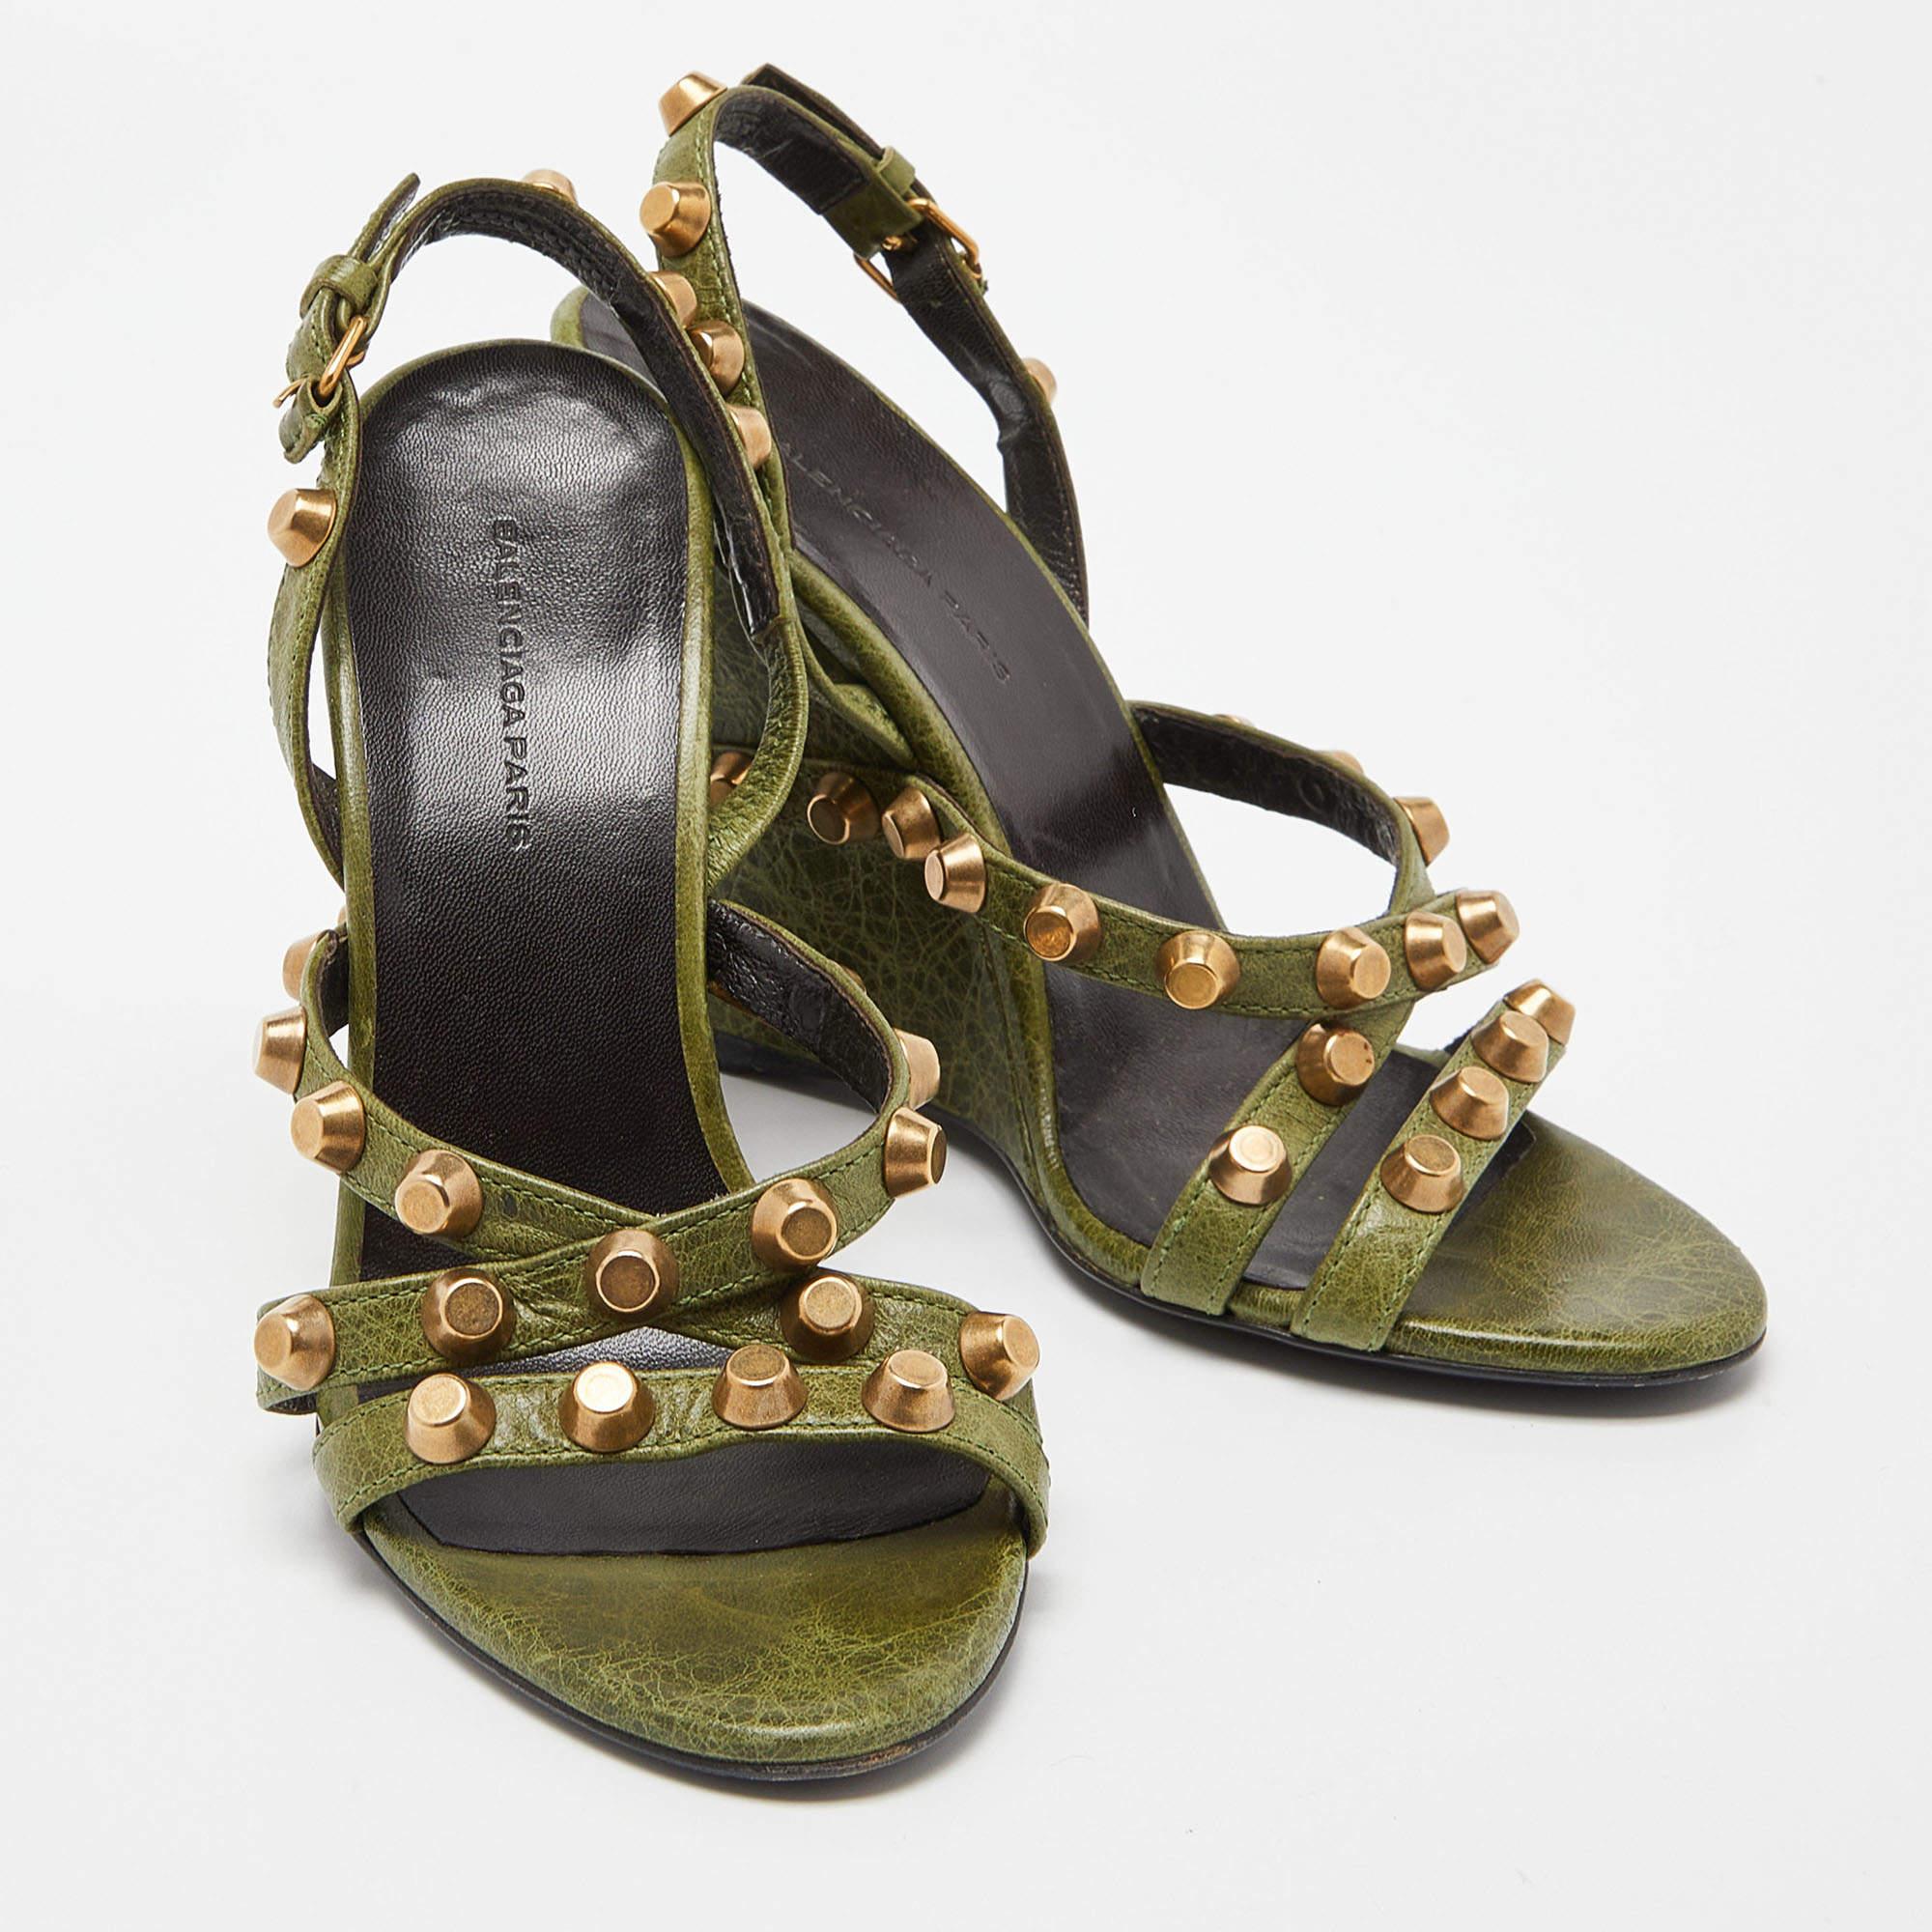 Women's Balenciaga Green Leather Arena Studded Wedge Sandals Size 36.5